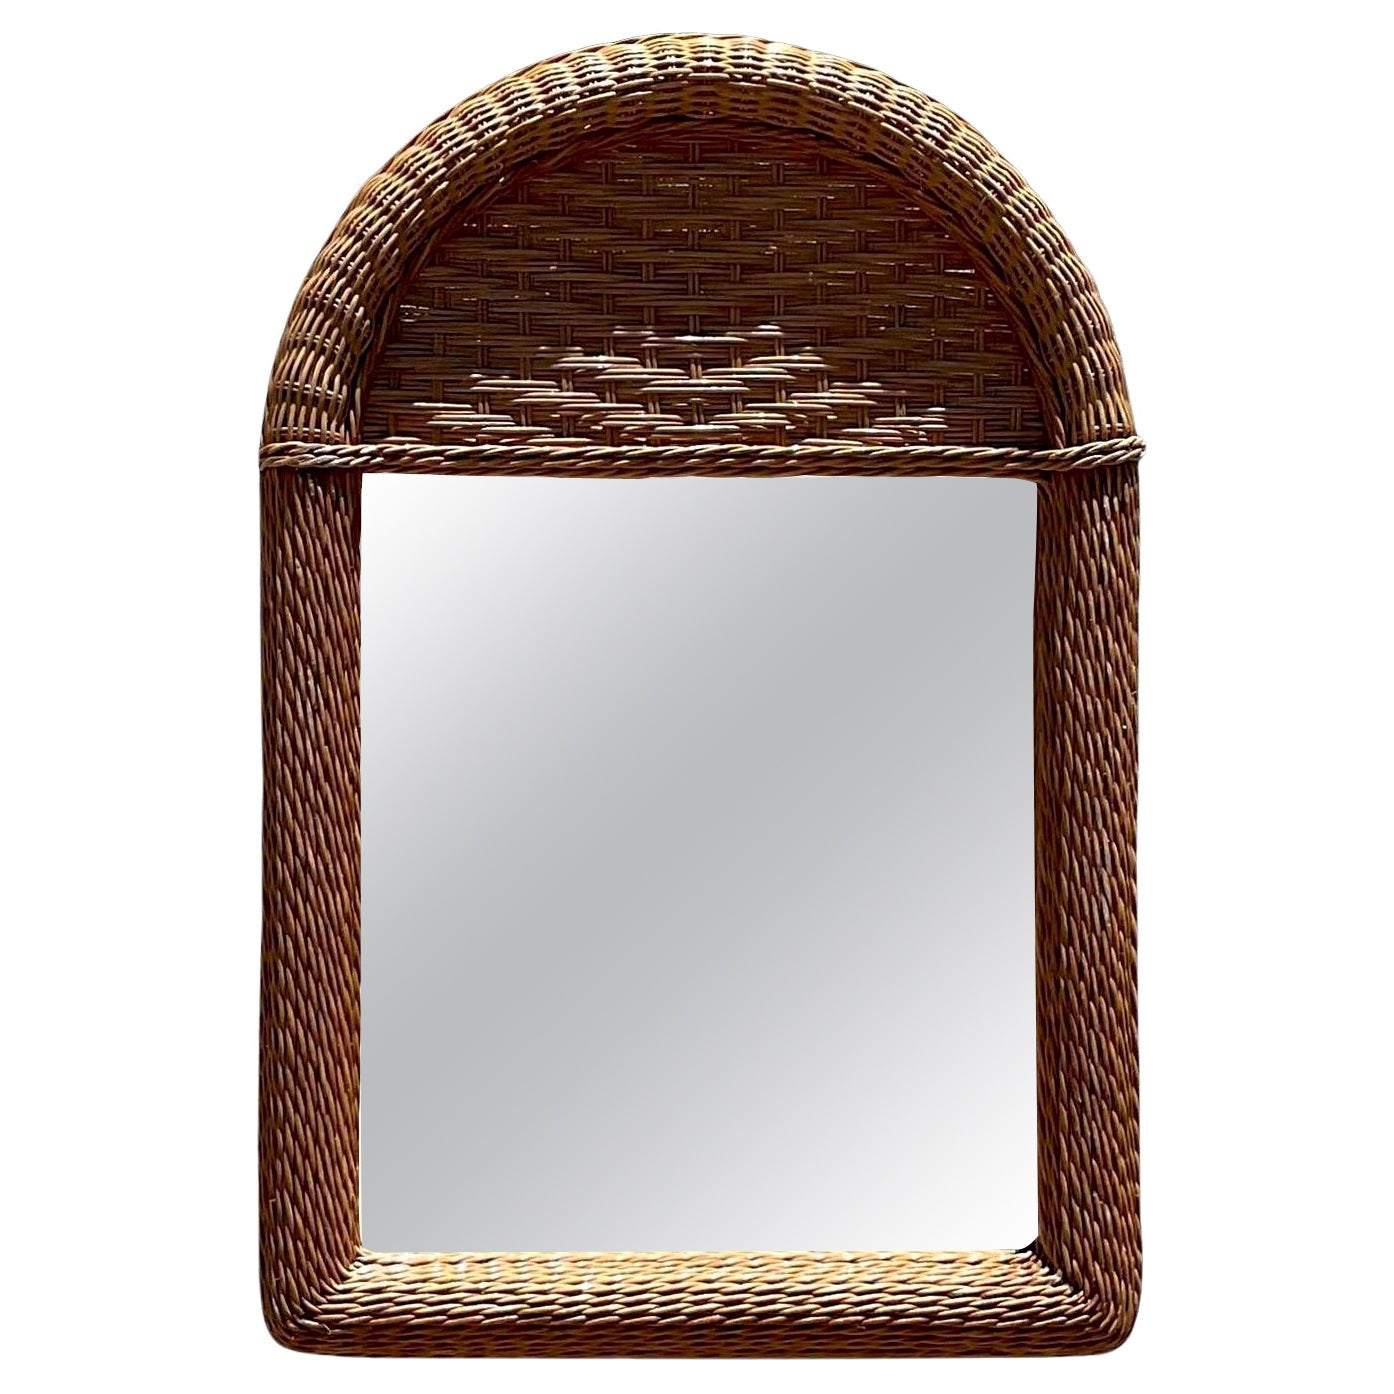 Vintage Coastal Woven Rattan Arched Mirror For Sale